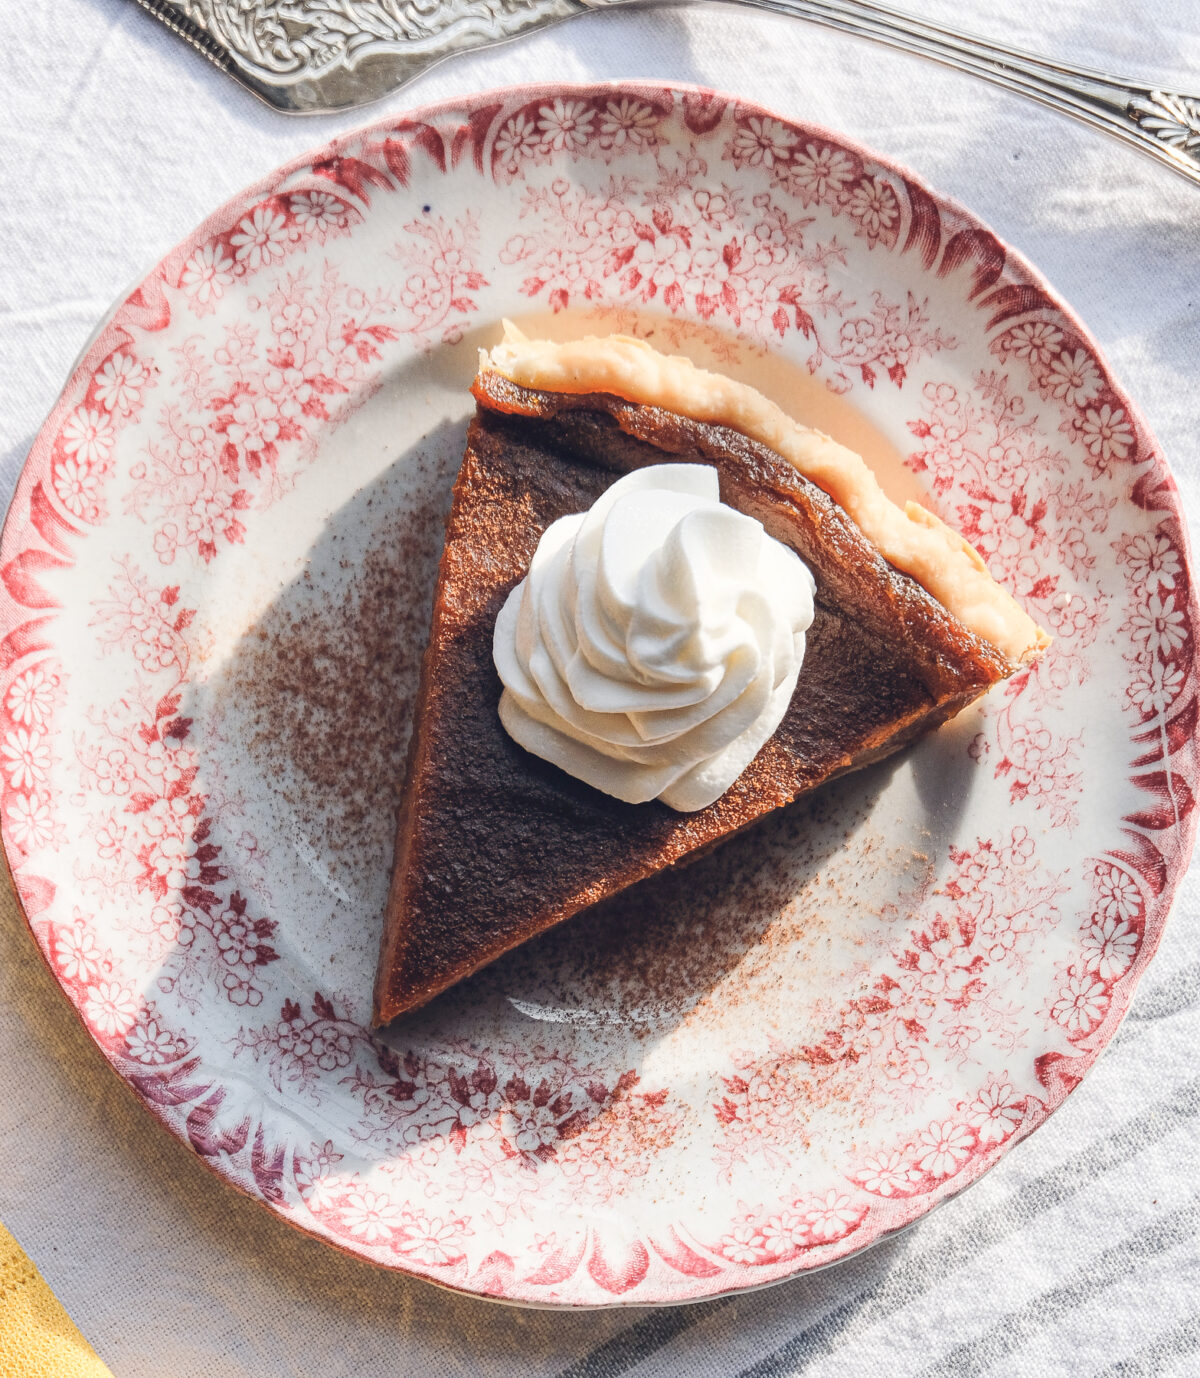 Top-down view of a pumpkin pie on a plate with whipped cream topping.